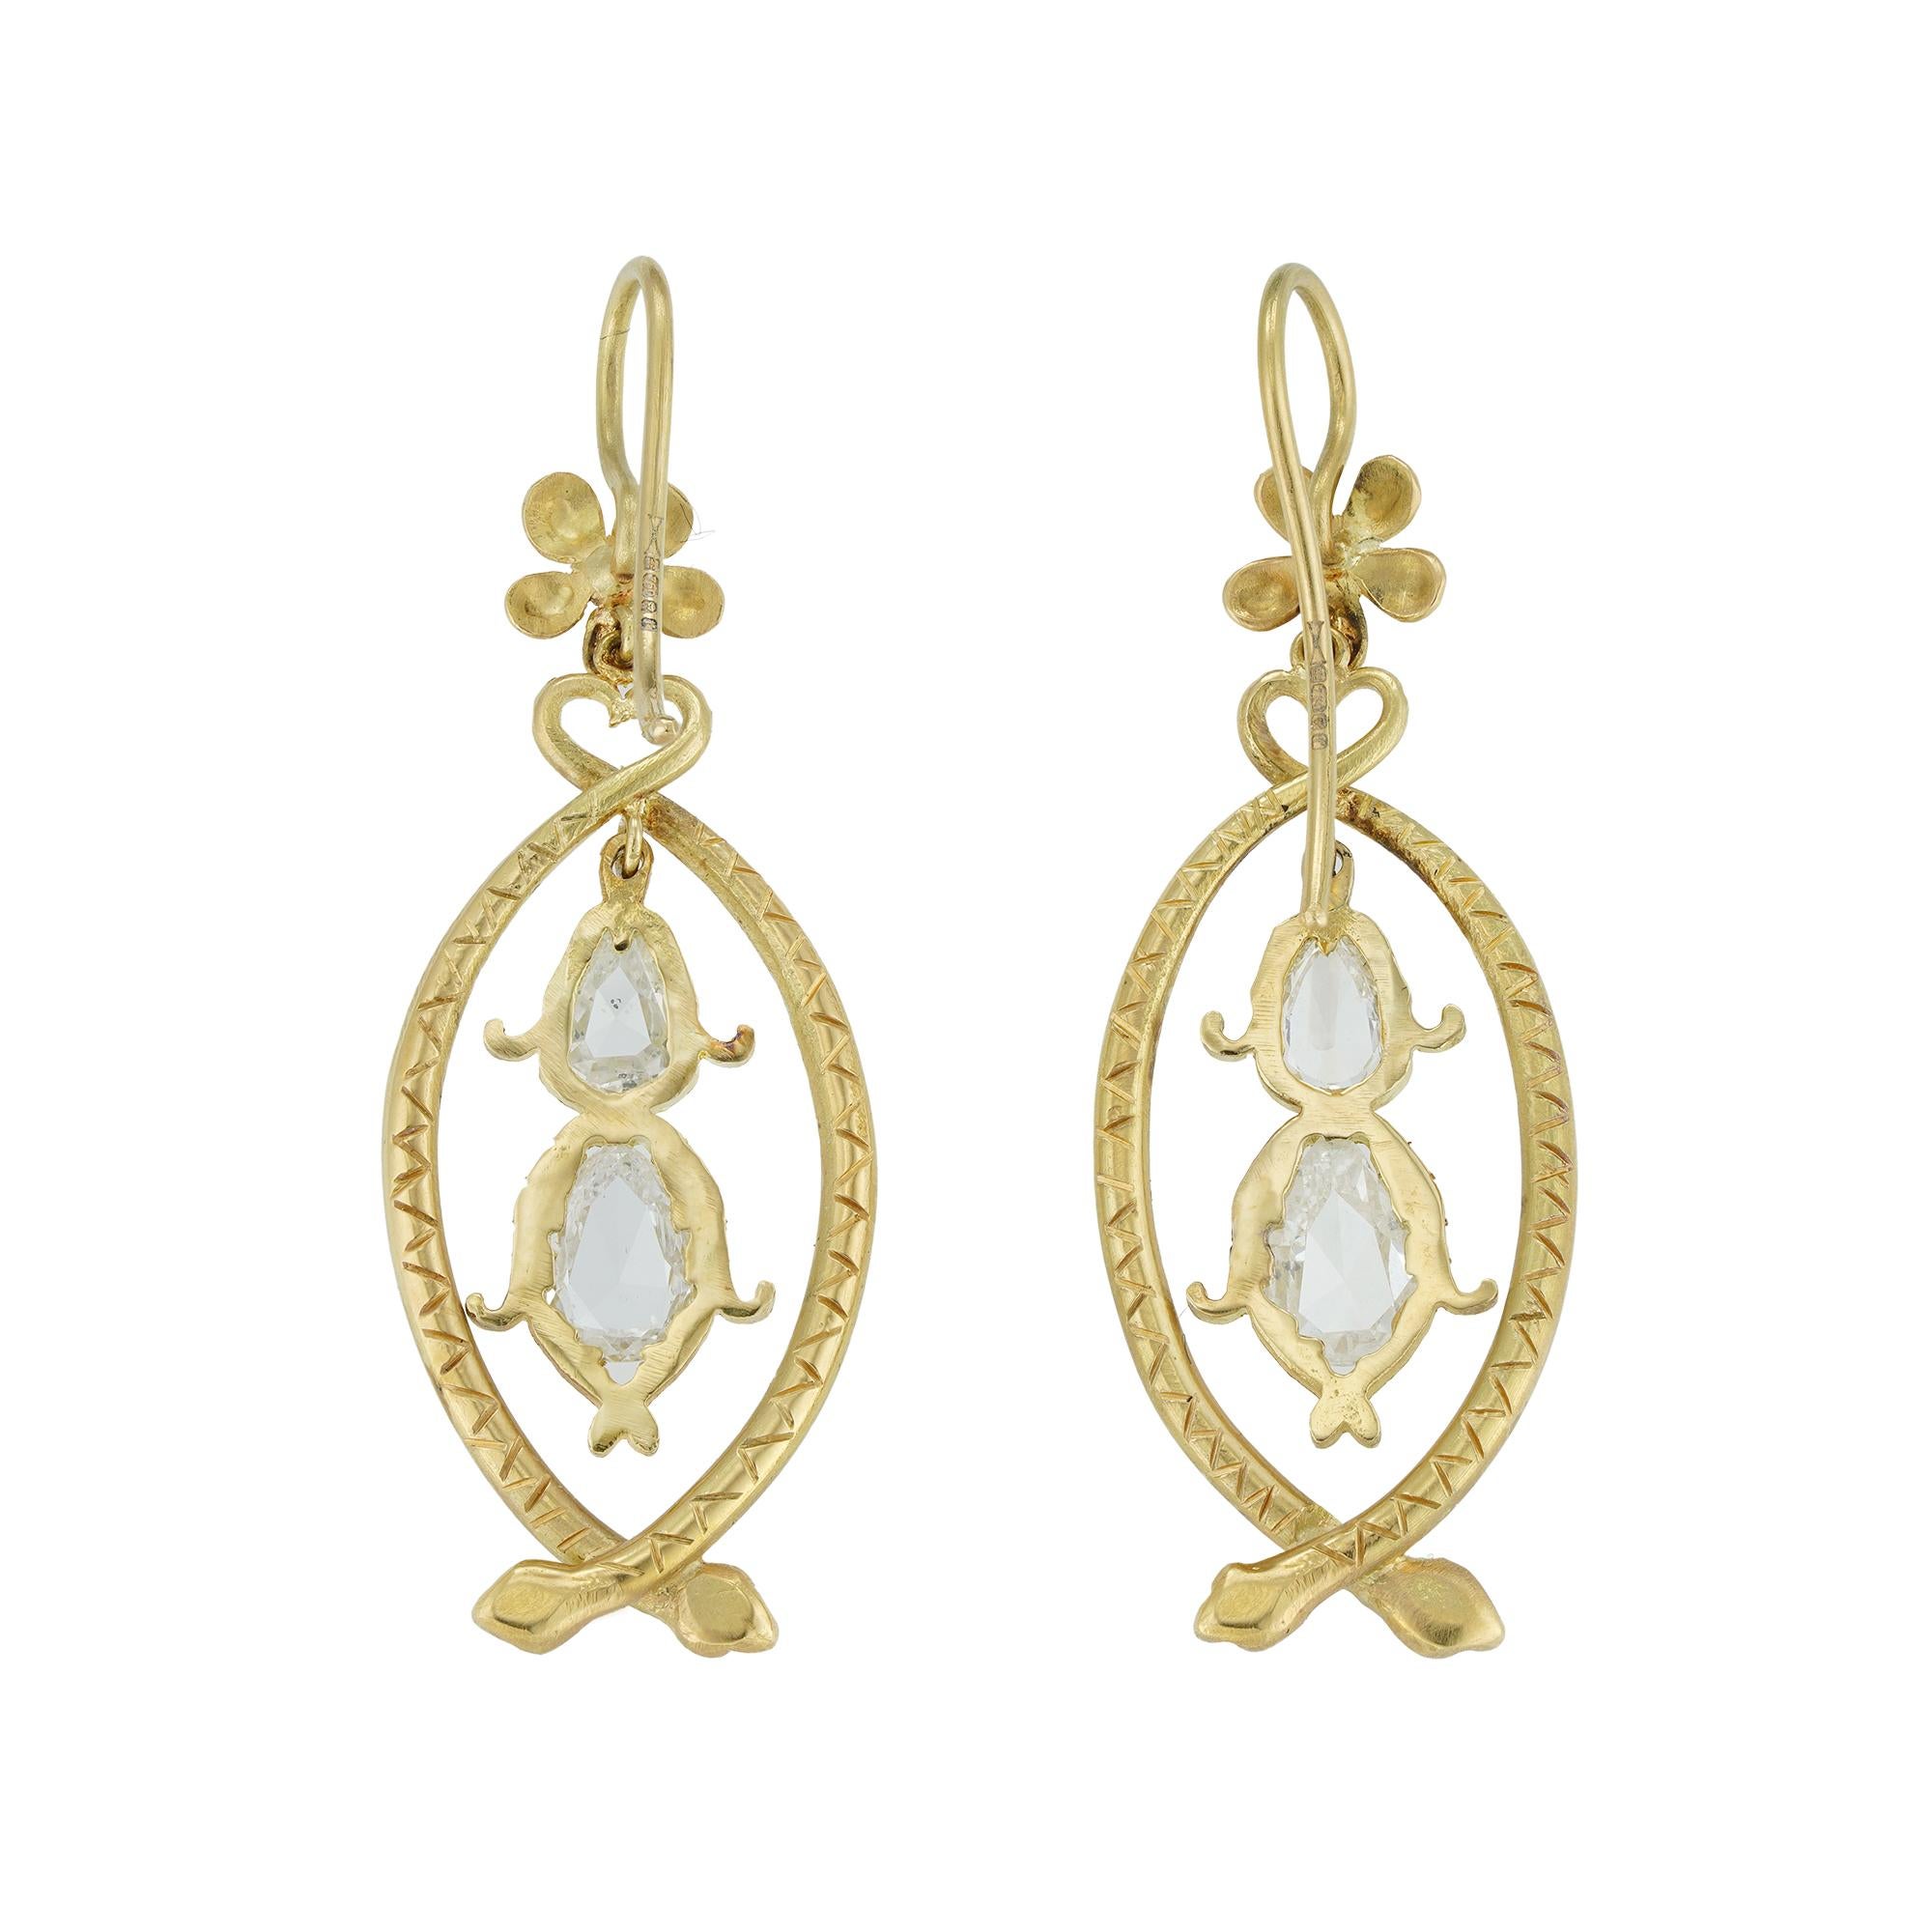 A pair of yellow gold and diamond-set serpent earrings, each earring with two pear-shaped rose-cut diamonds in a navette-shaped frame of yellow gold in the form of two intertwined serpents, surmounted by a yellow gold forget-me-not flower, the